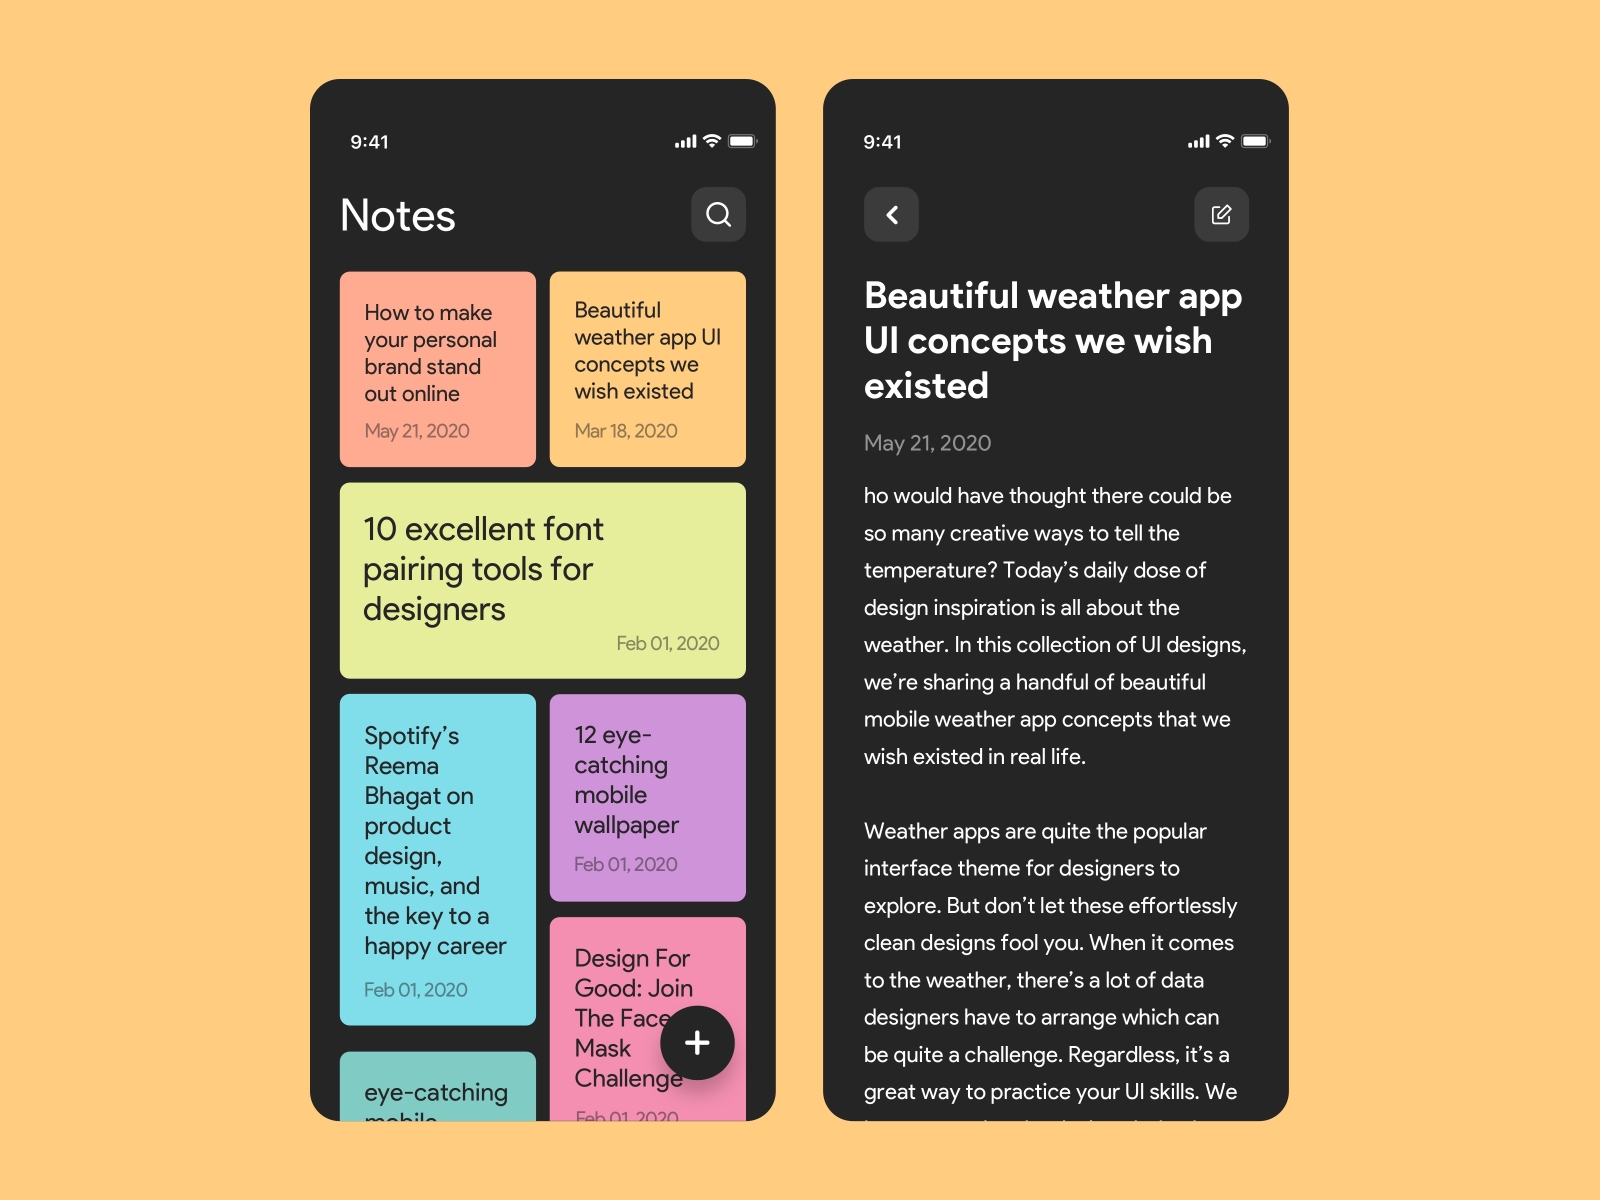 download simple notes app for windows